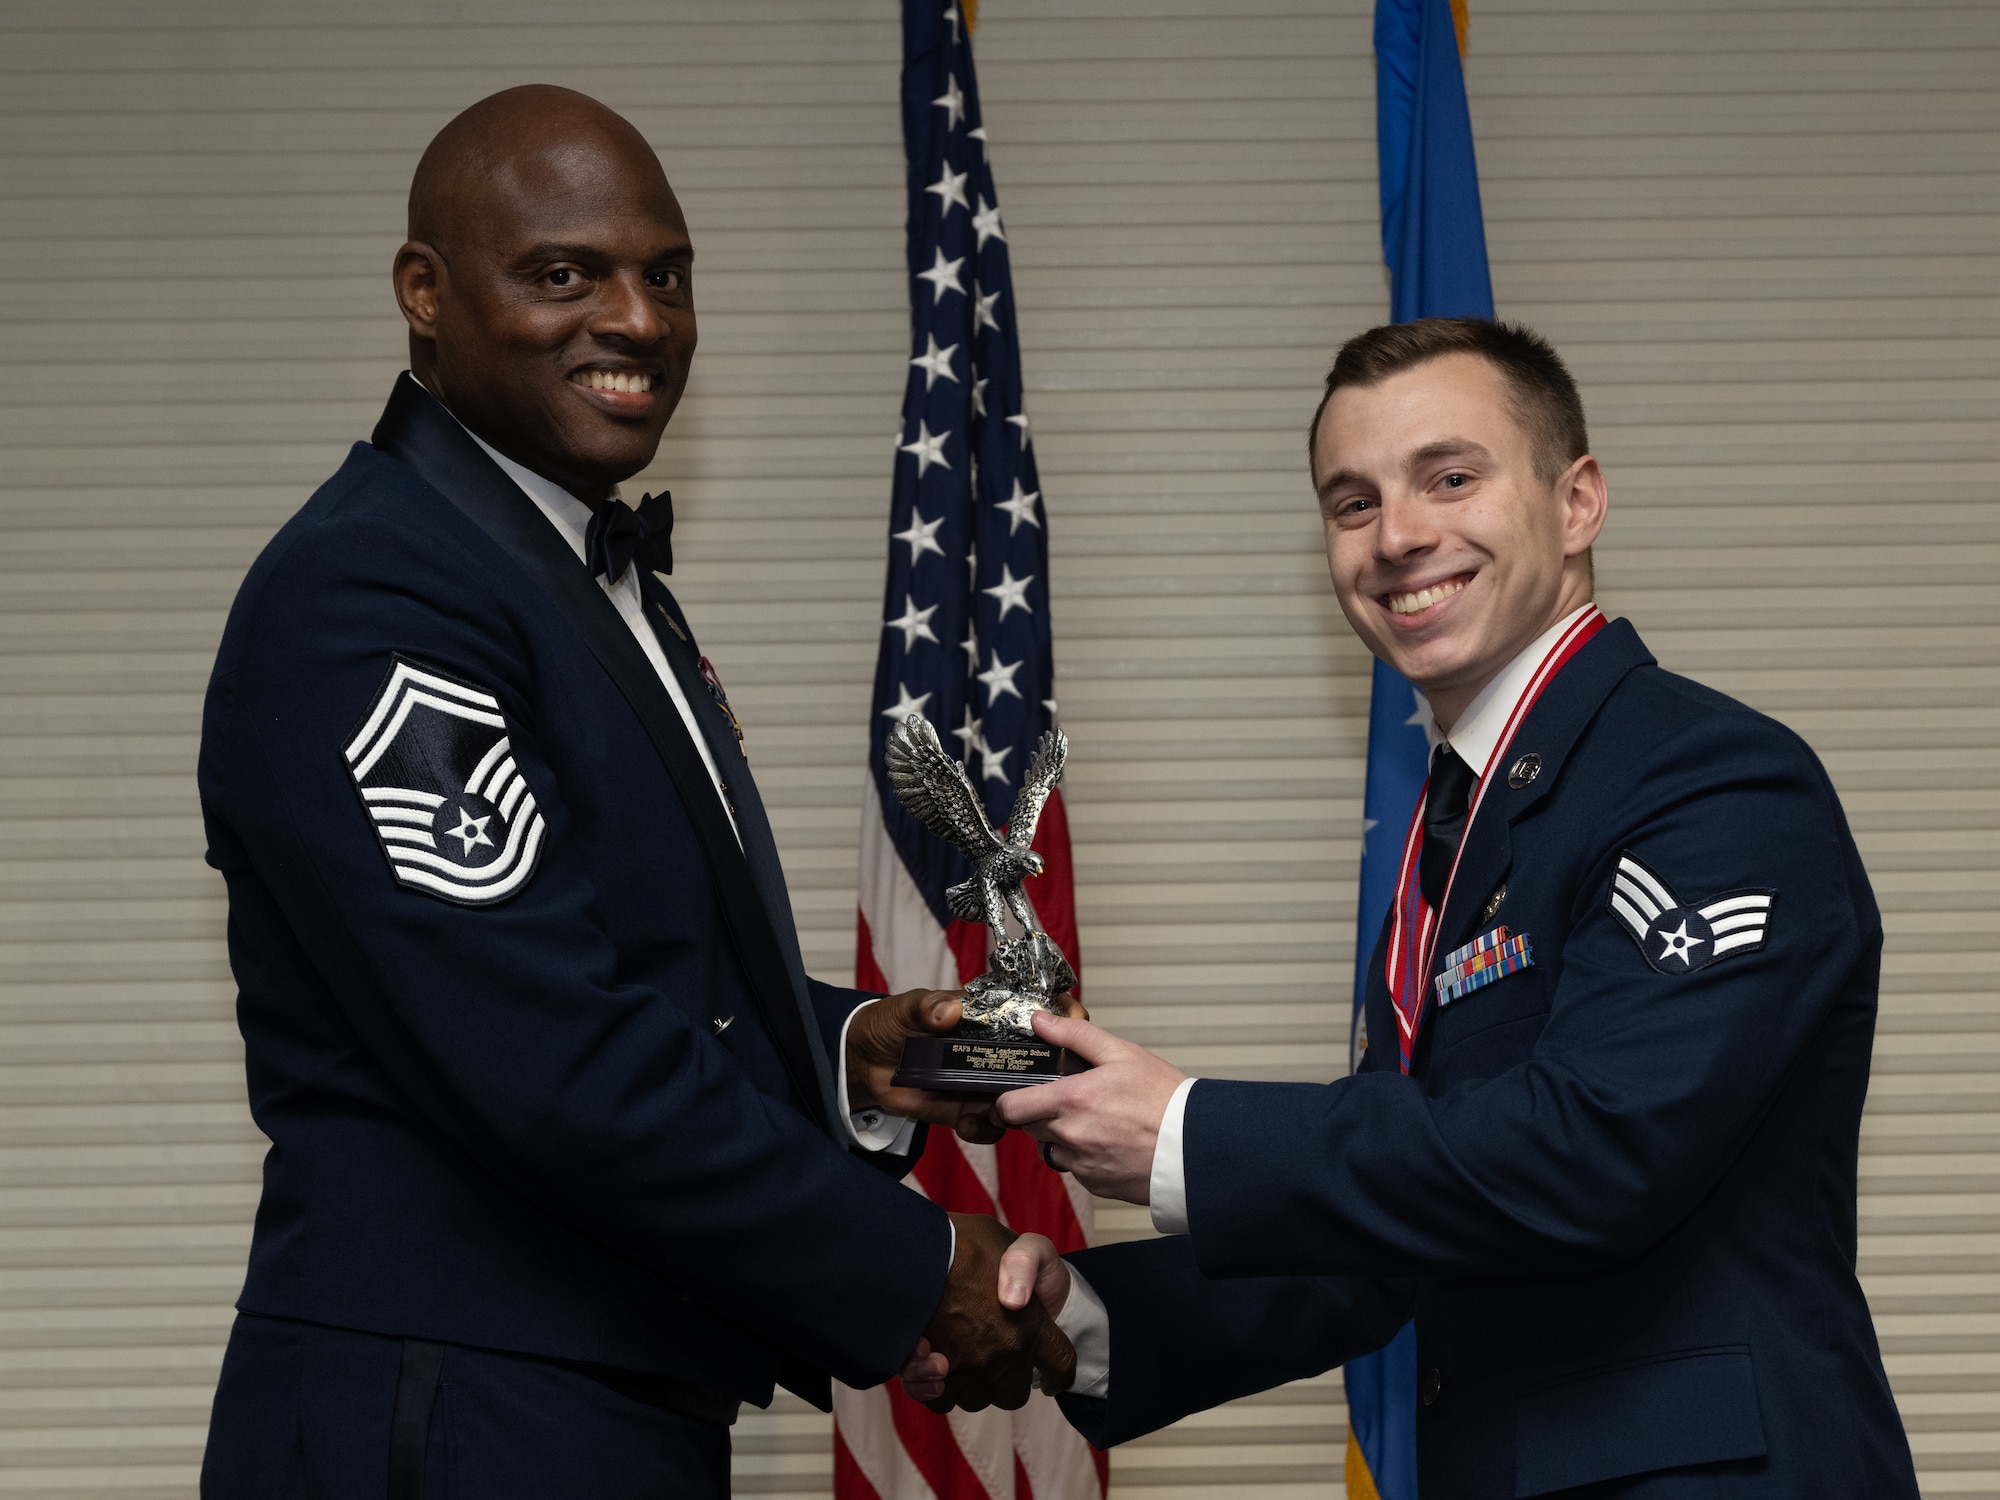 U.S. Air Force Senior Airman Ryan Kekic,4th Logistics Readiness Squadron customer service technician, receives the Distinguished Graduate Award from Senior Master Sgt. Torrey Byrd, Maintenance Operations flight weapons superintendent, during the Airman Leadership School class 24-D graduation ceremony at Seymour Johnson Air Force Base, North Carolina, May 2, 2024. Students who received the Distinguished Graduate Award displayed effective teamwork, academic excellence and leadership skills. (U.S. Air Force photo by Airman Megan Cusmano)